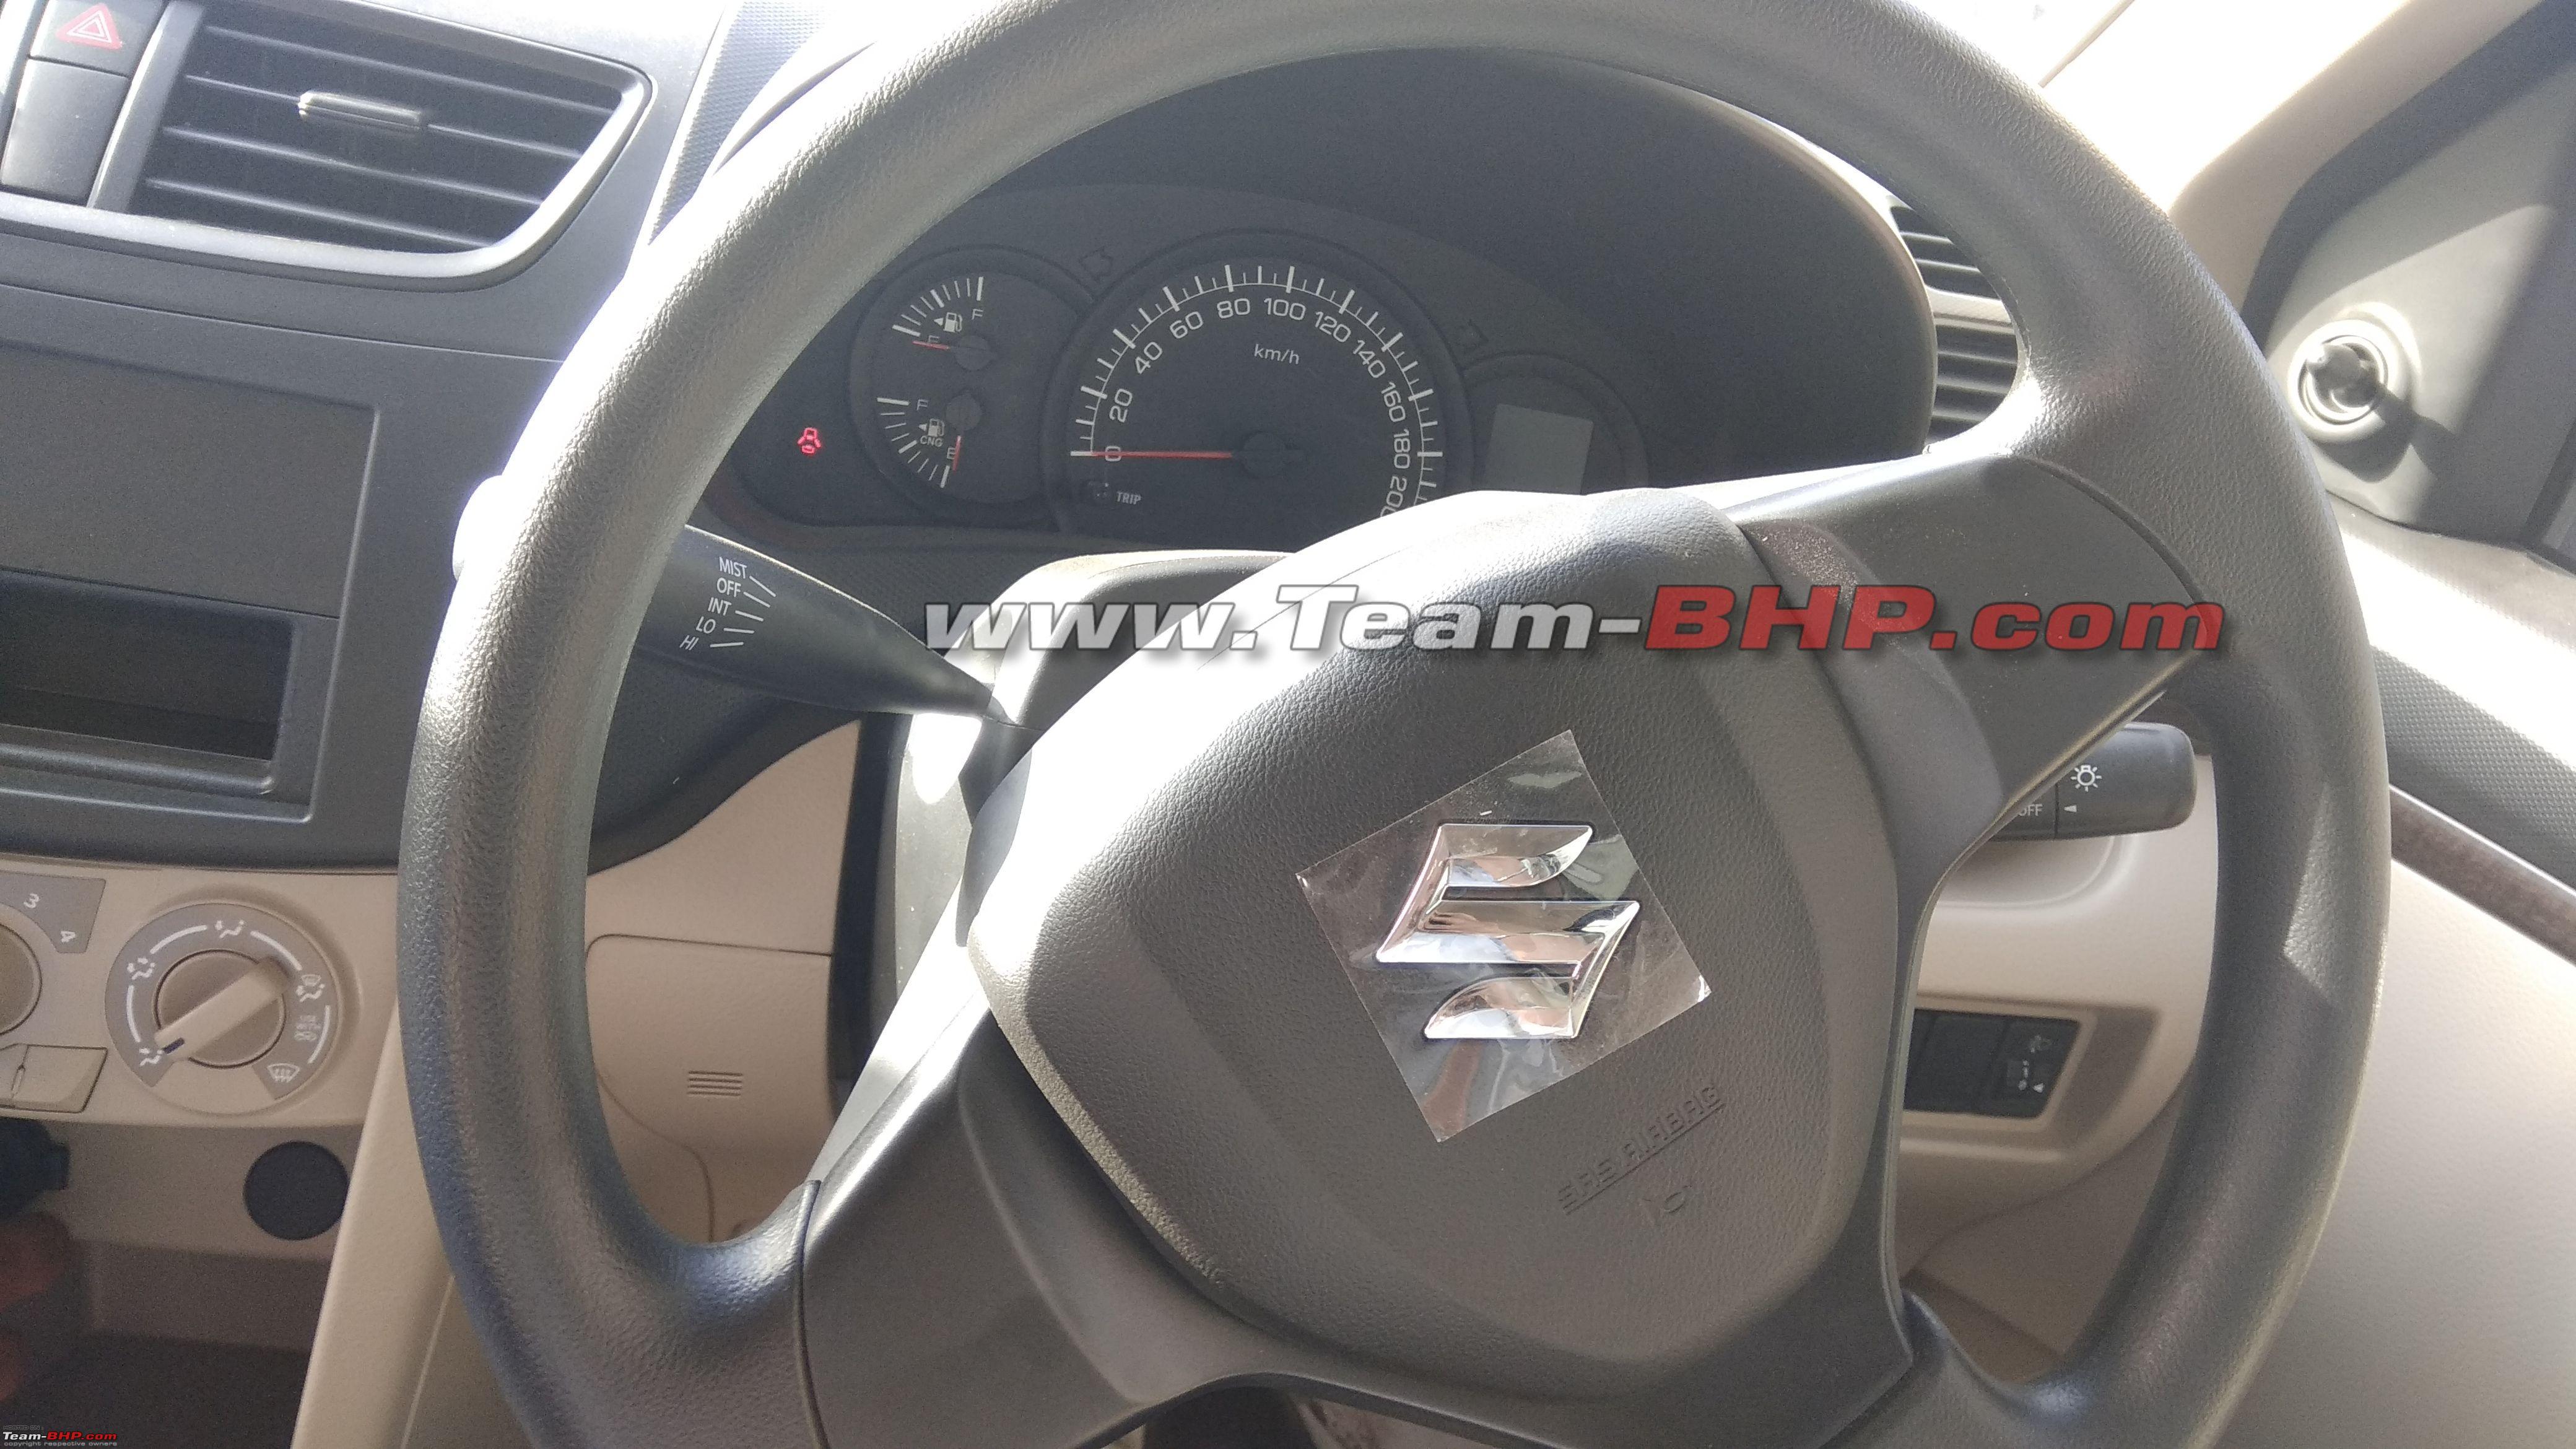 Maruti Dzire Tour S Cng Specifications Leaked Team Bhp